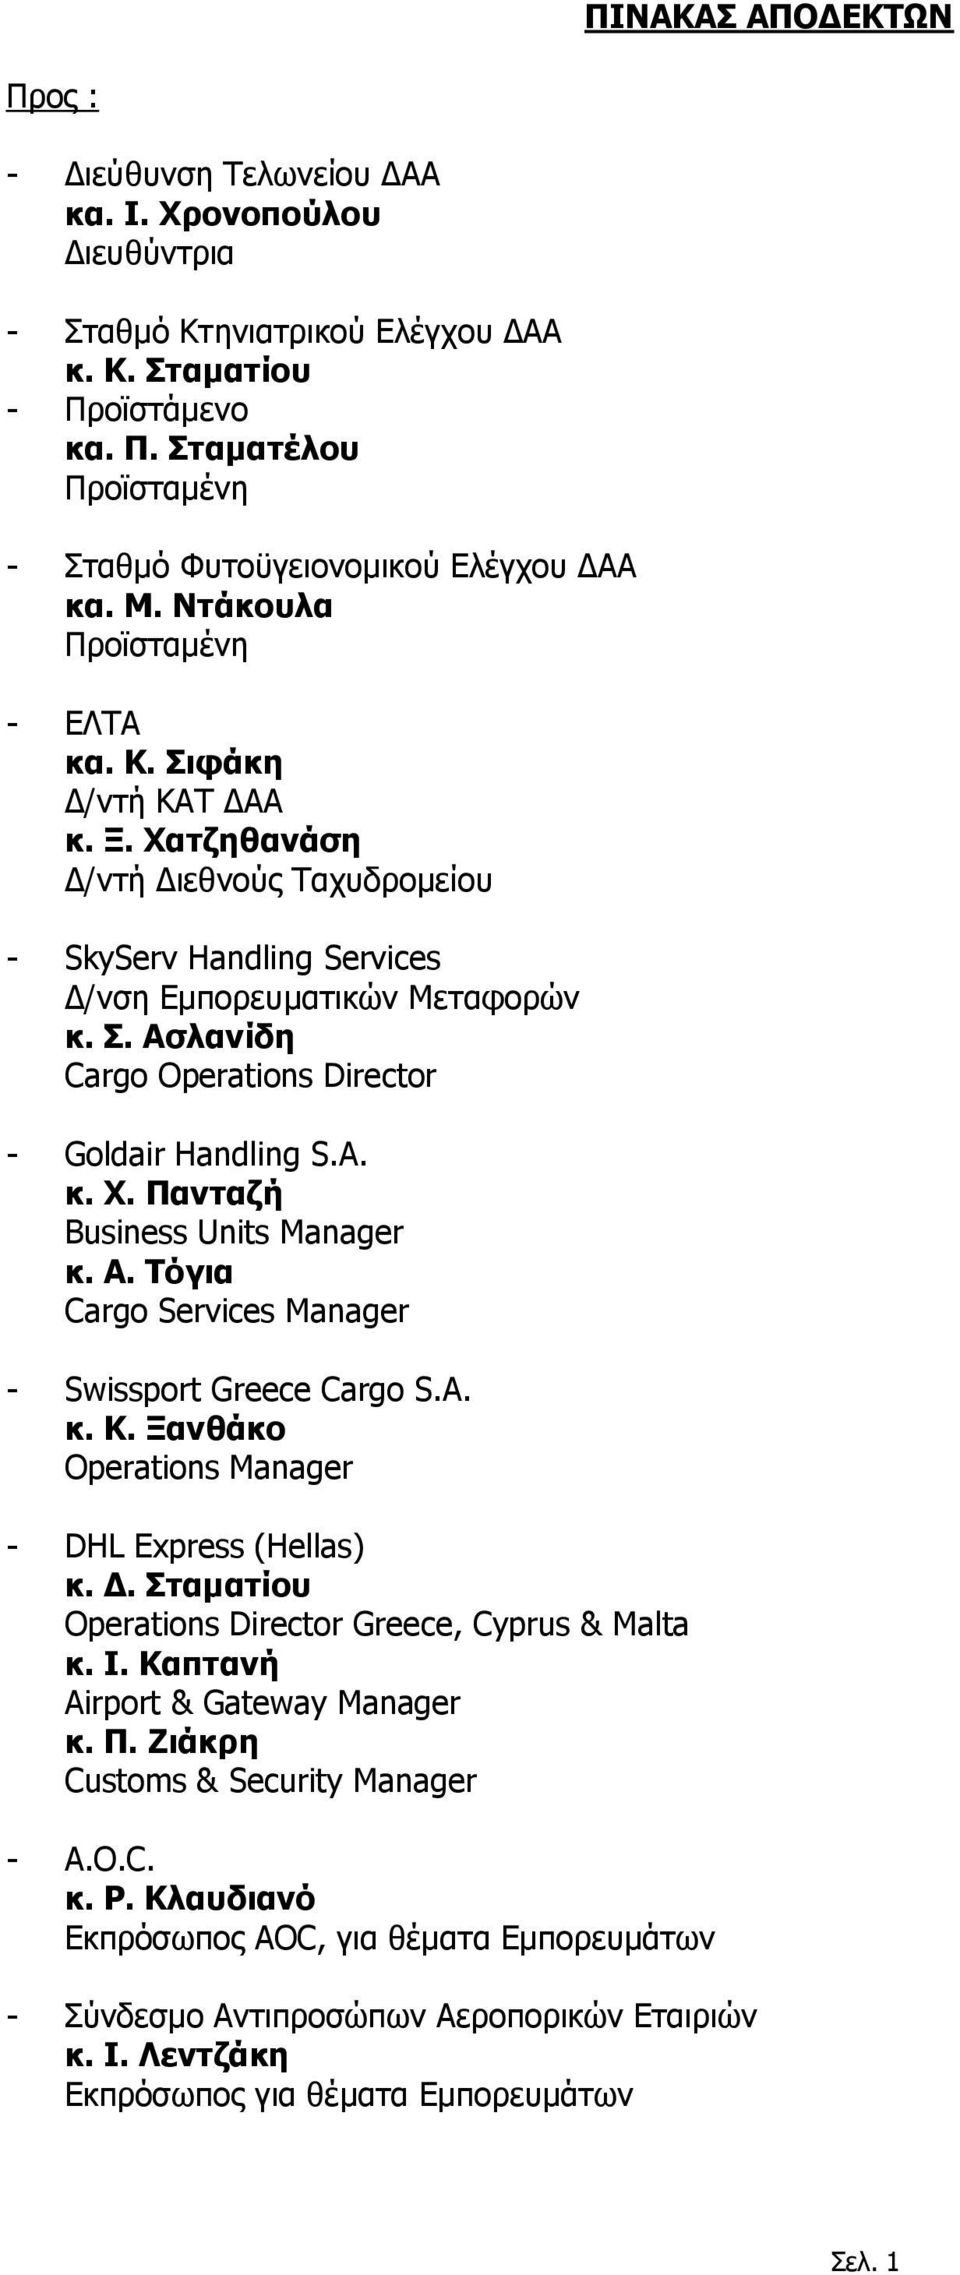 A. κ. Χ. Πανταζή Business Units Manager κ. Α. Τόγια Cargo Services Manager - Swissport Greece Cargo S.A. κ. Κ. Ξανθάκο Operations Manager - DHL Express (Hellas) κ. Δ.